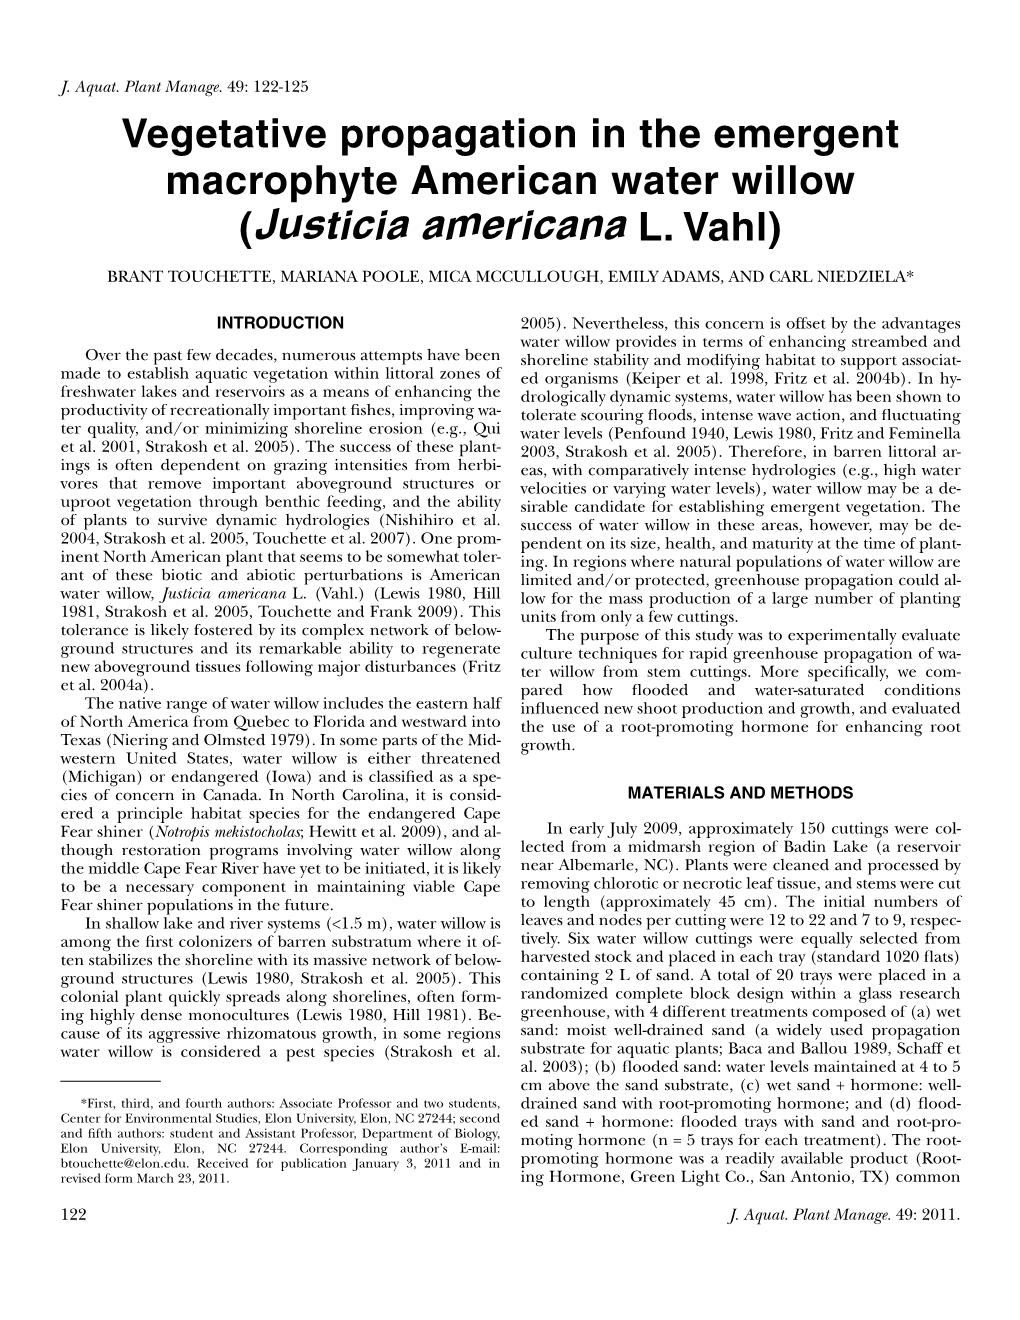 Vegetative Propagation in the Emergent Macrophyte American Water Willow (Justicia Americana L. Vahl)